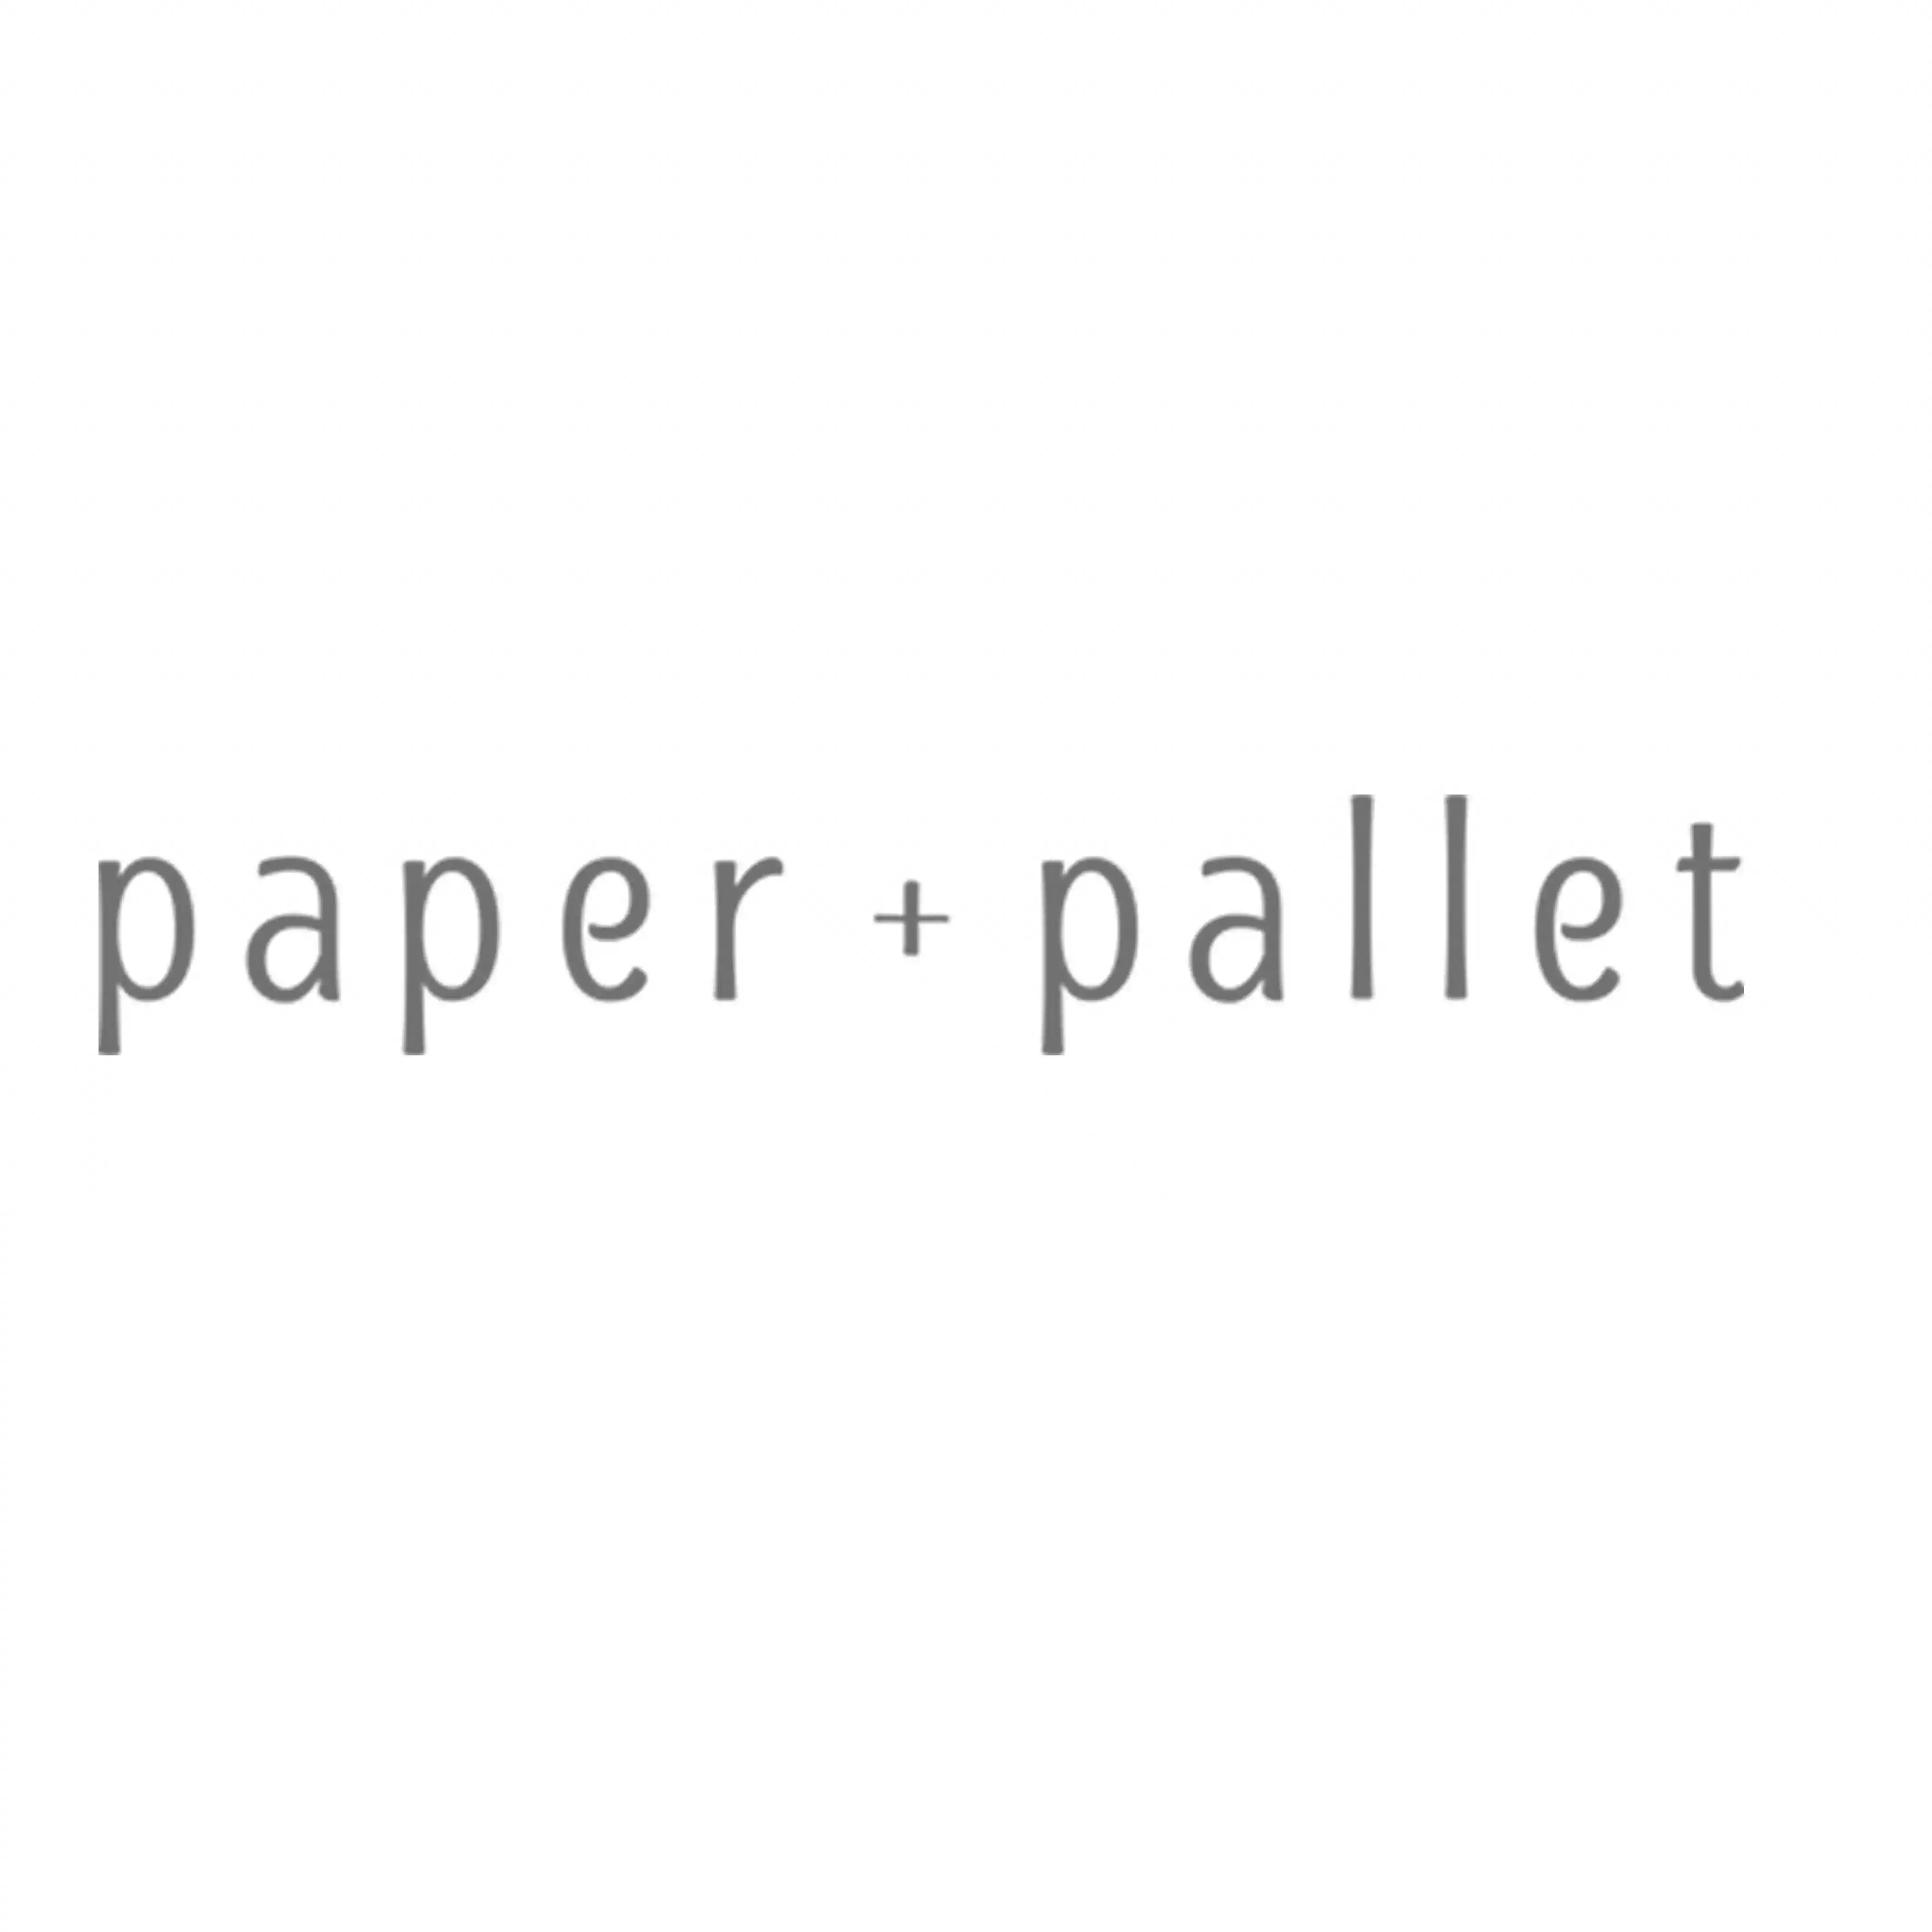 Paper and Pallet logo